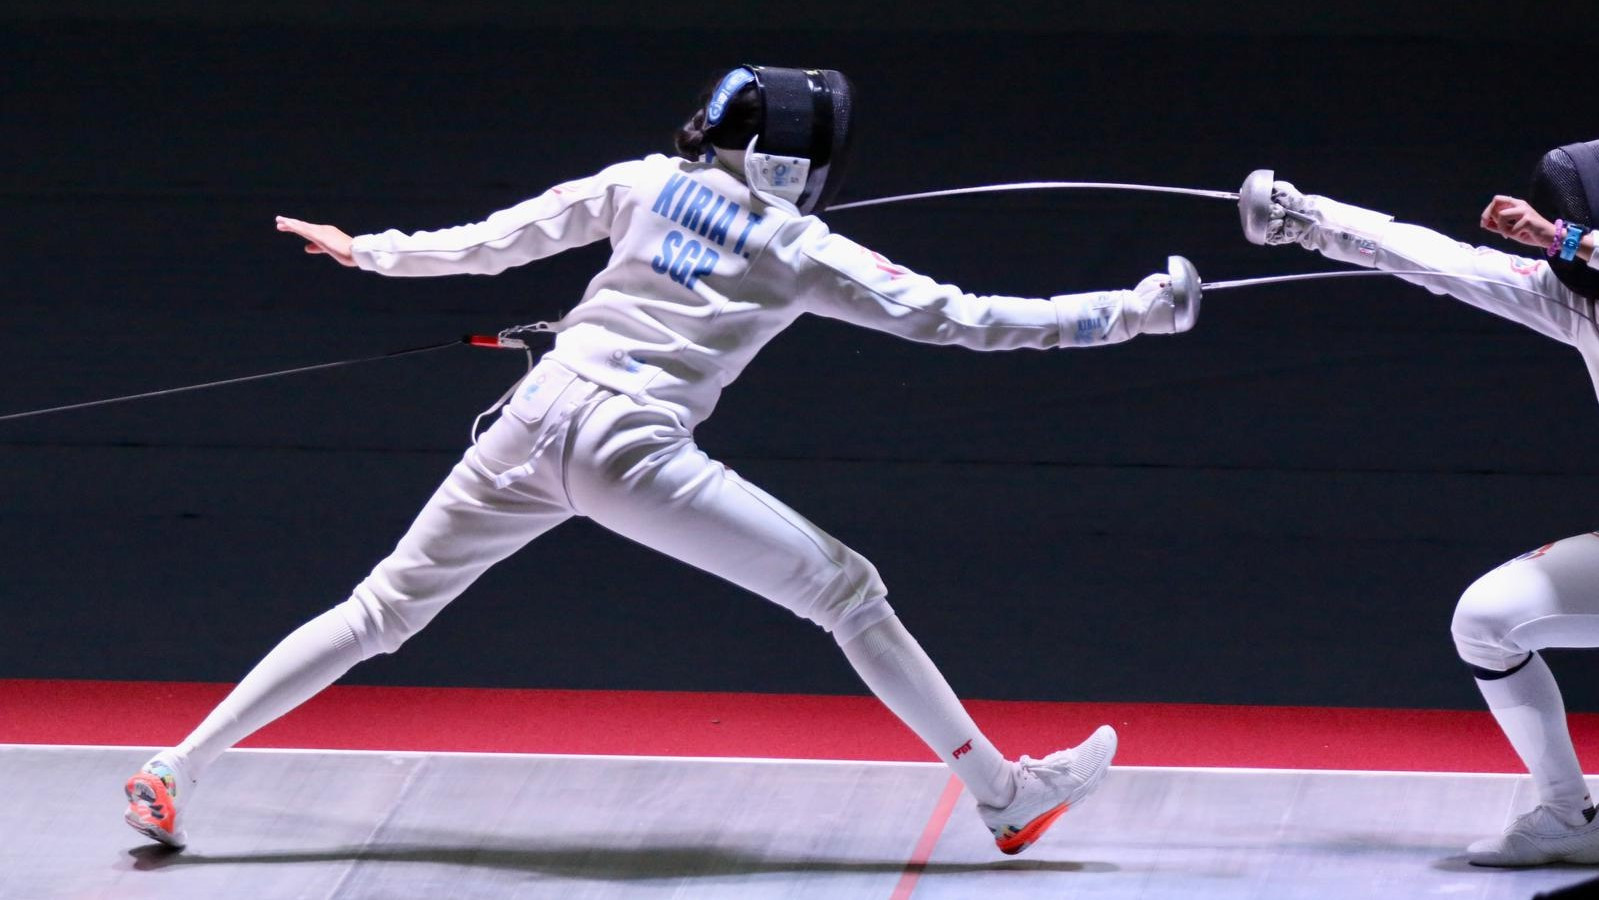 Kiria participated in the 2021 Southeast Asian Games and clinched the Gold medal in the Team Épée category, and the Silver medal in the Women’s Individual Épée category. (Photo: Kiria Tikanah)
